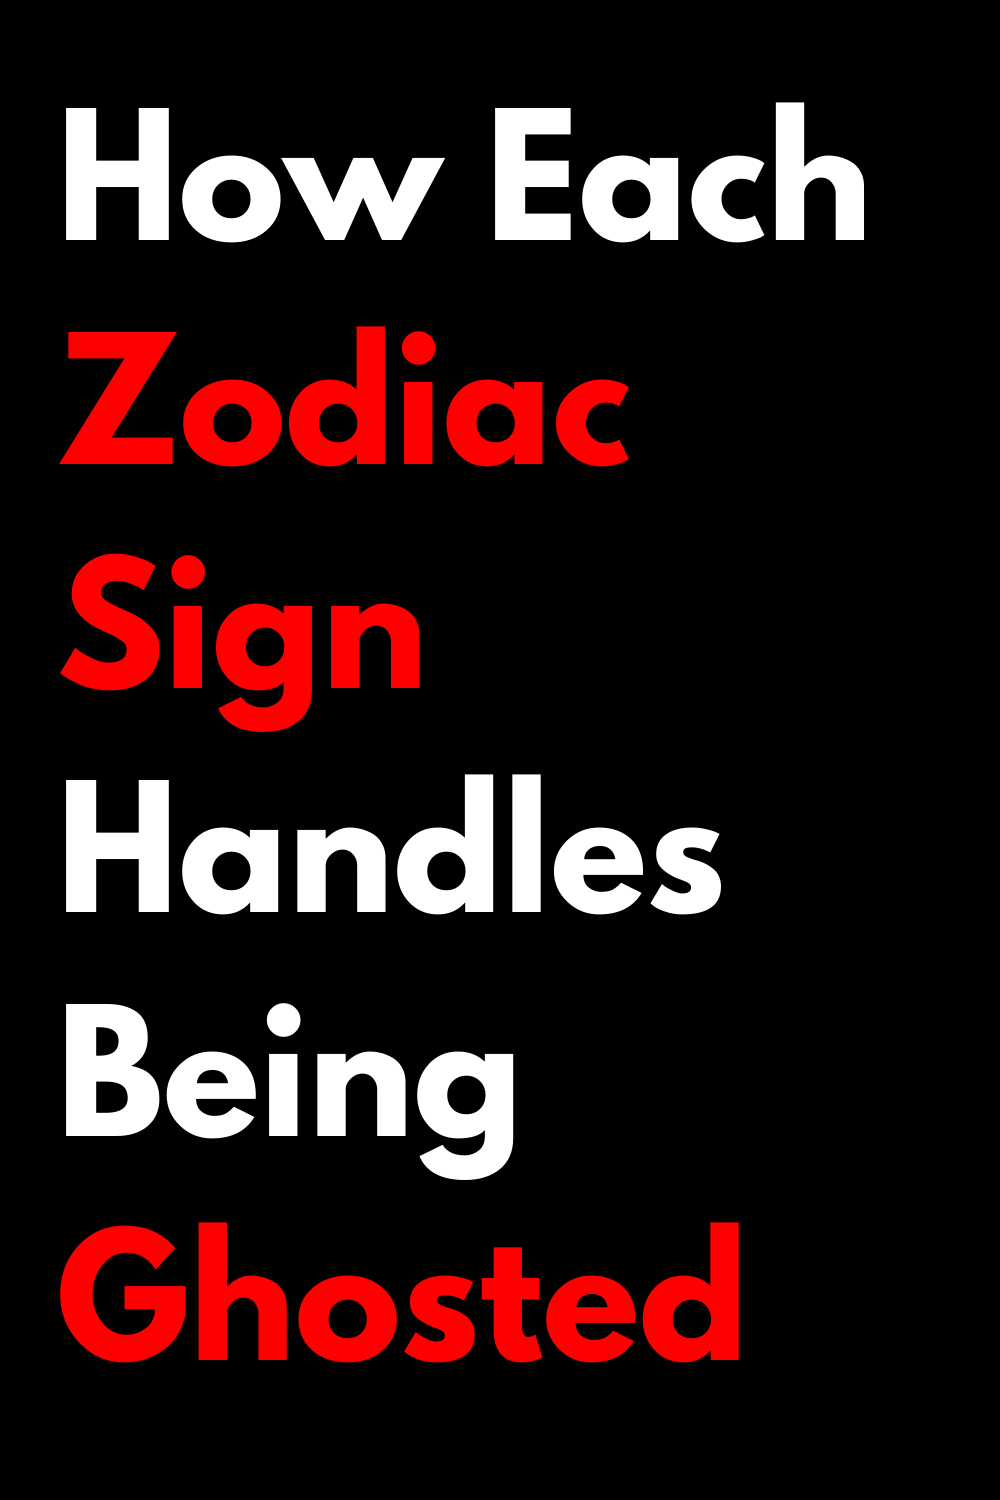 How Each Zodiac Sign Handles Being Ghosted